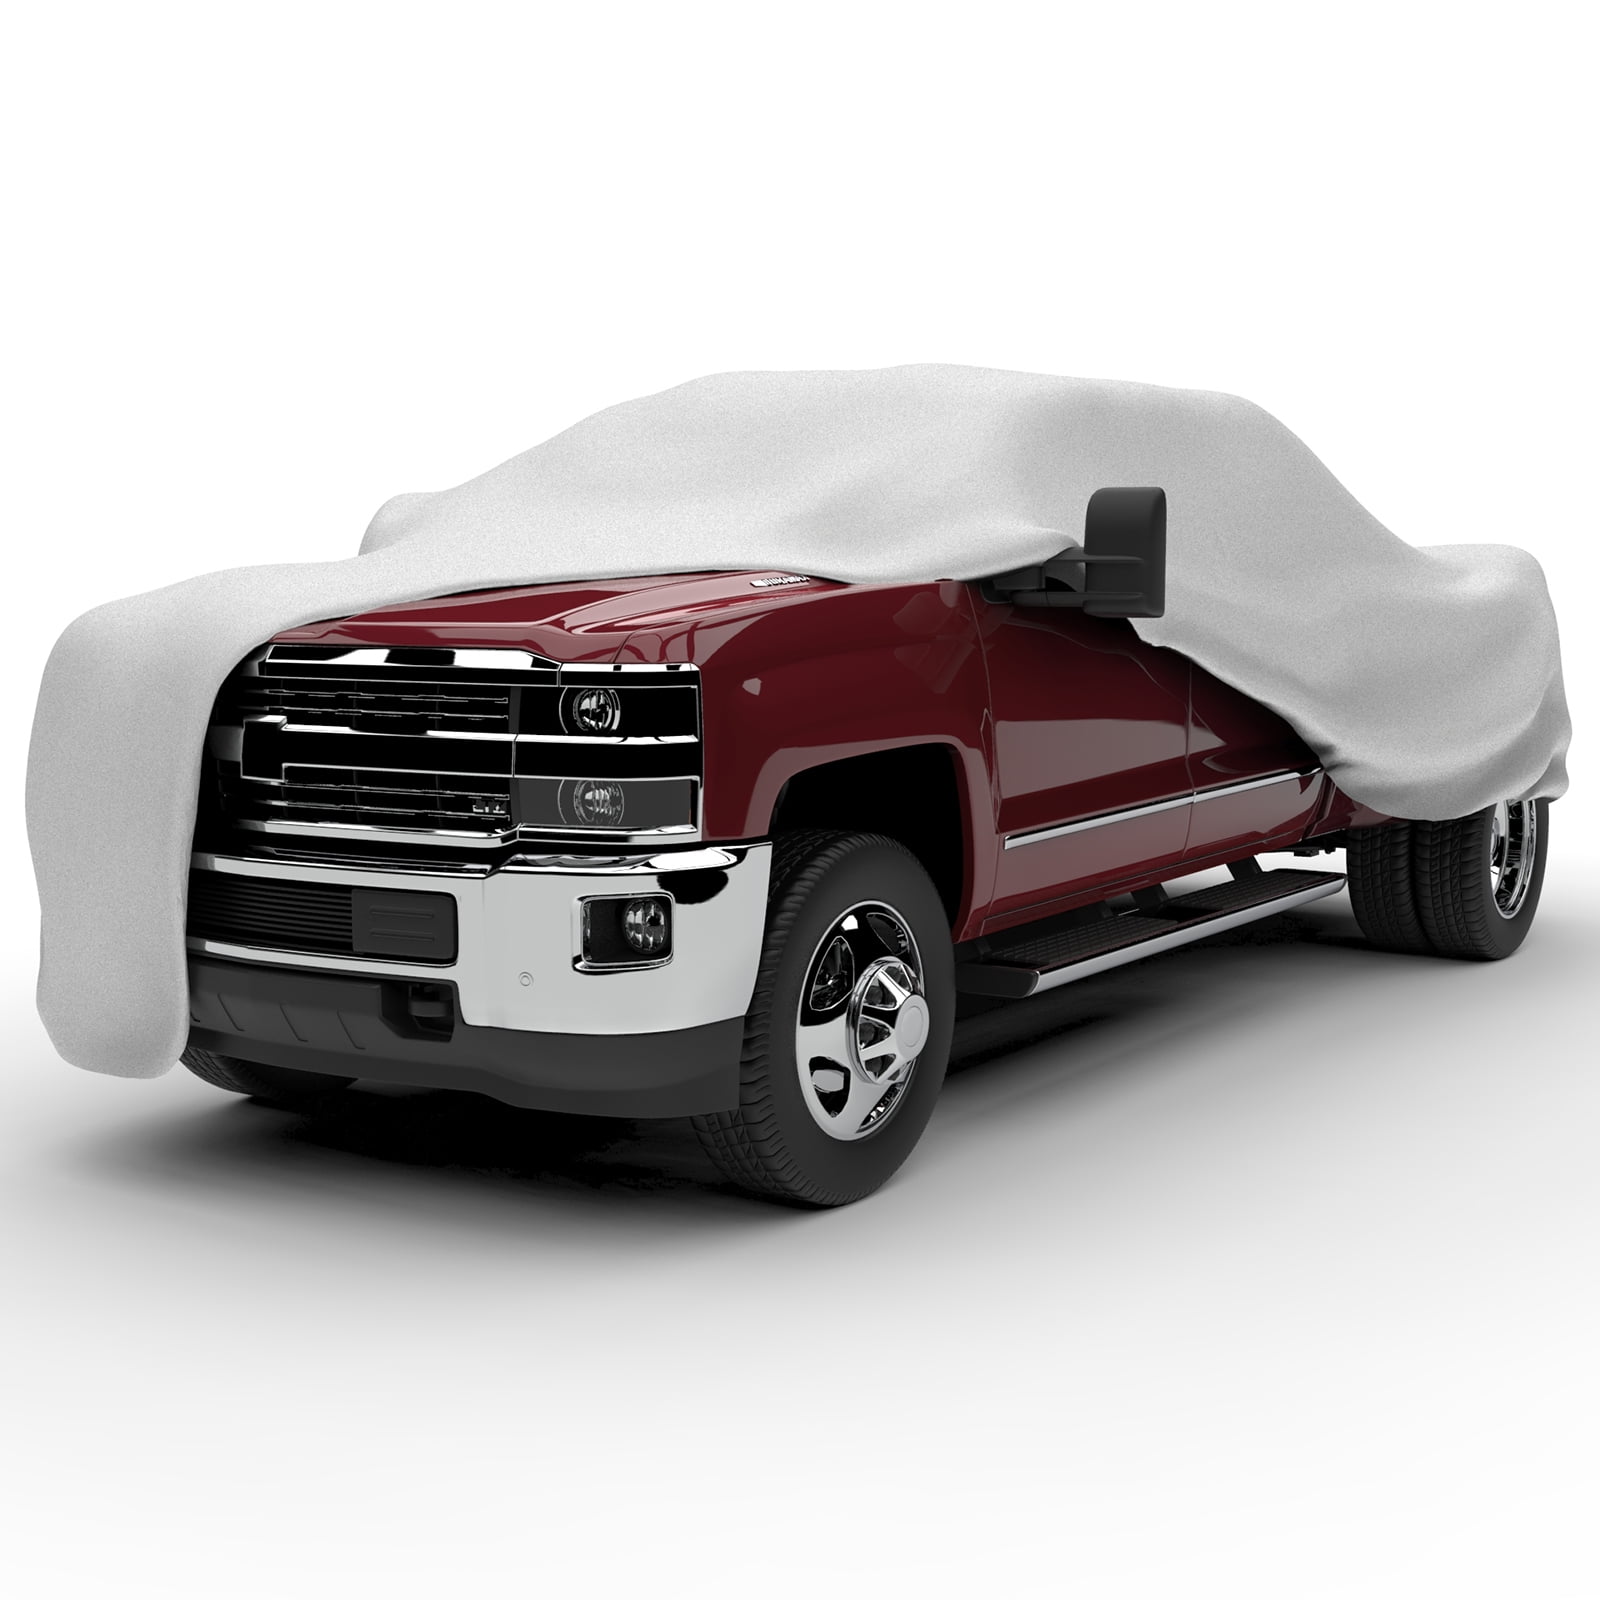 Budge Basic Truck Cover, Basic Indoor Protection for Trucks